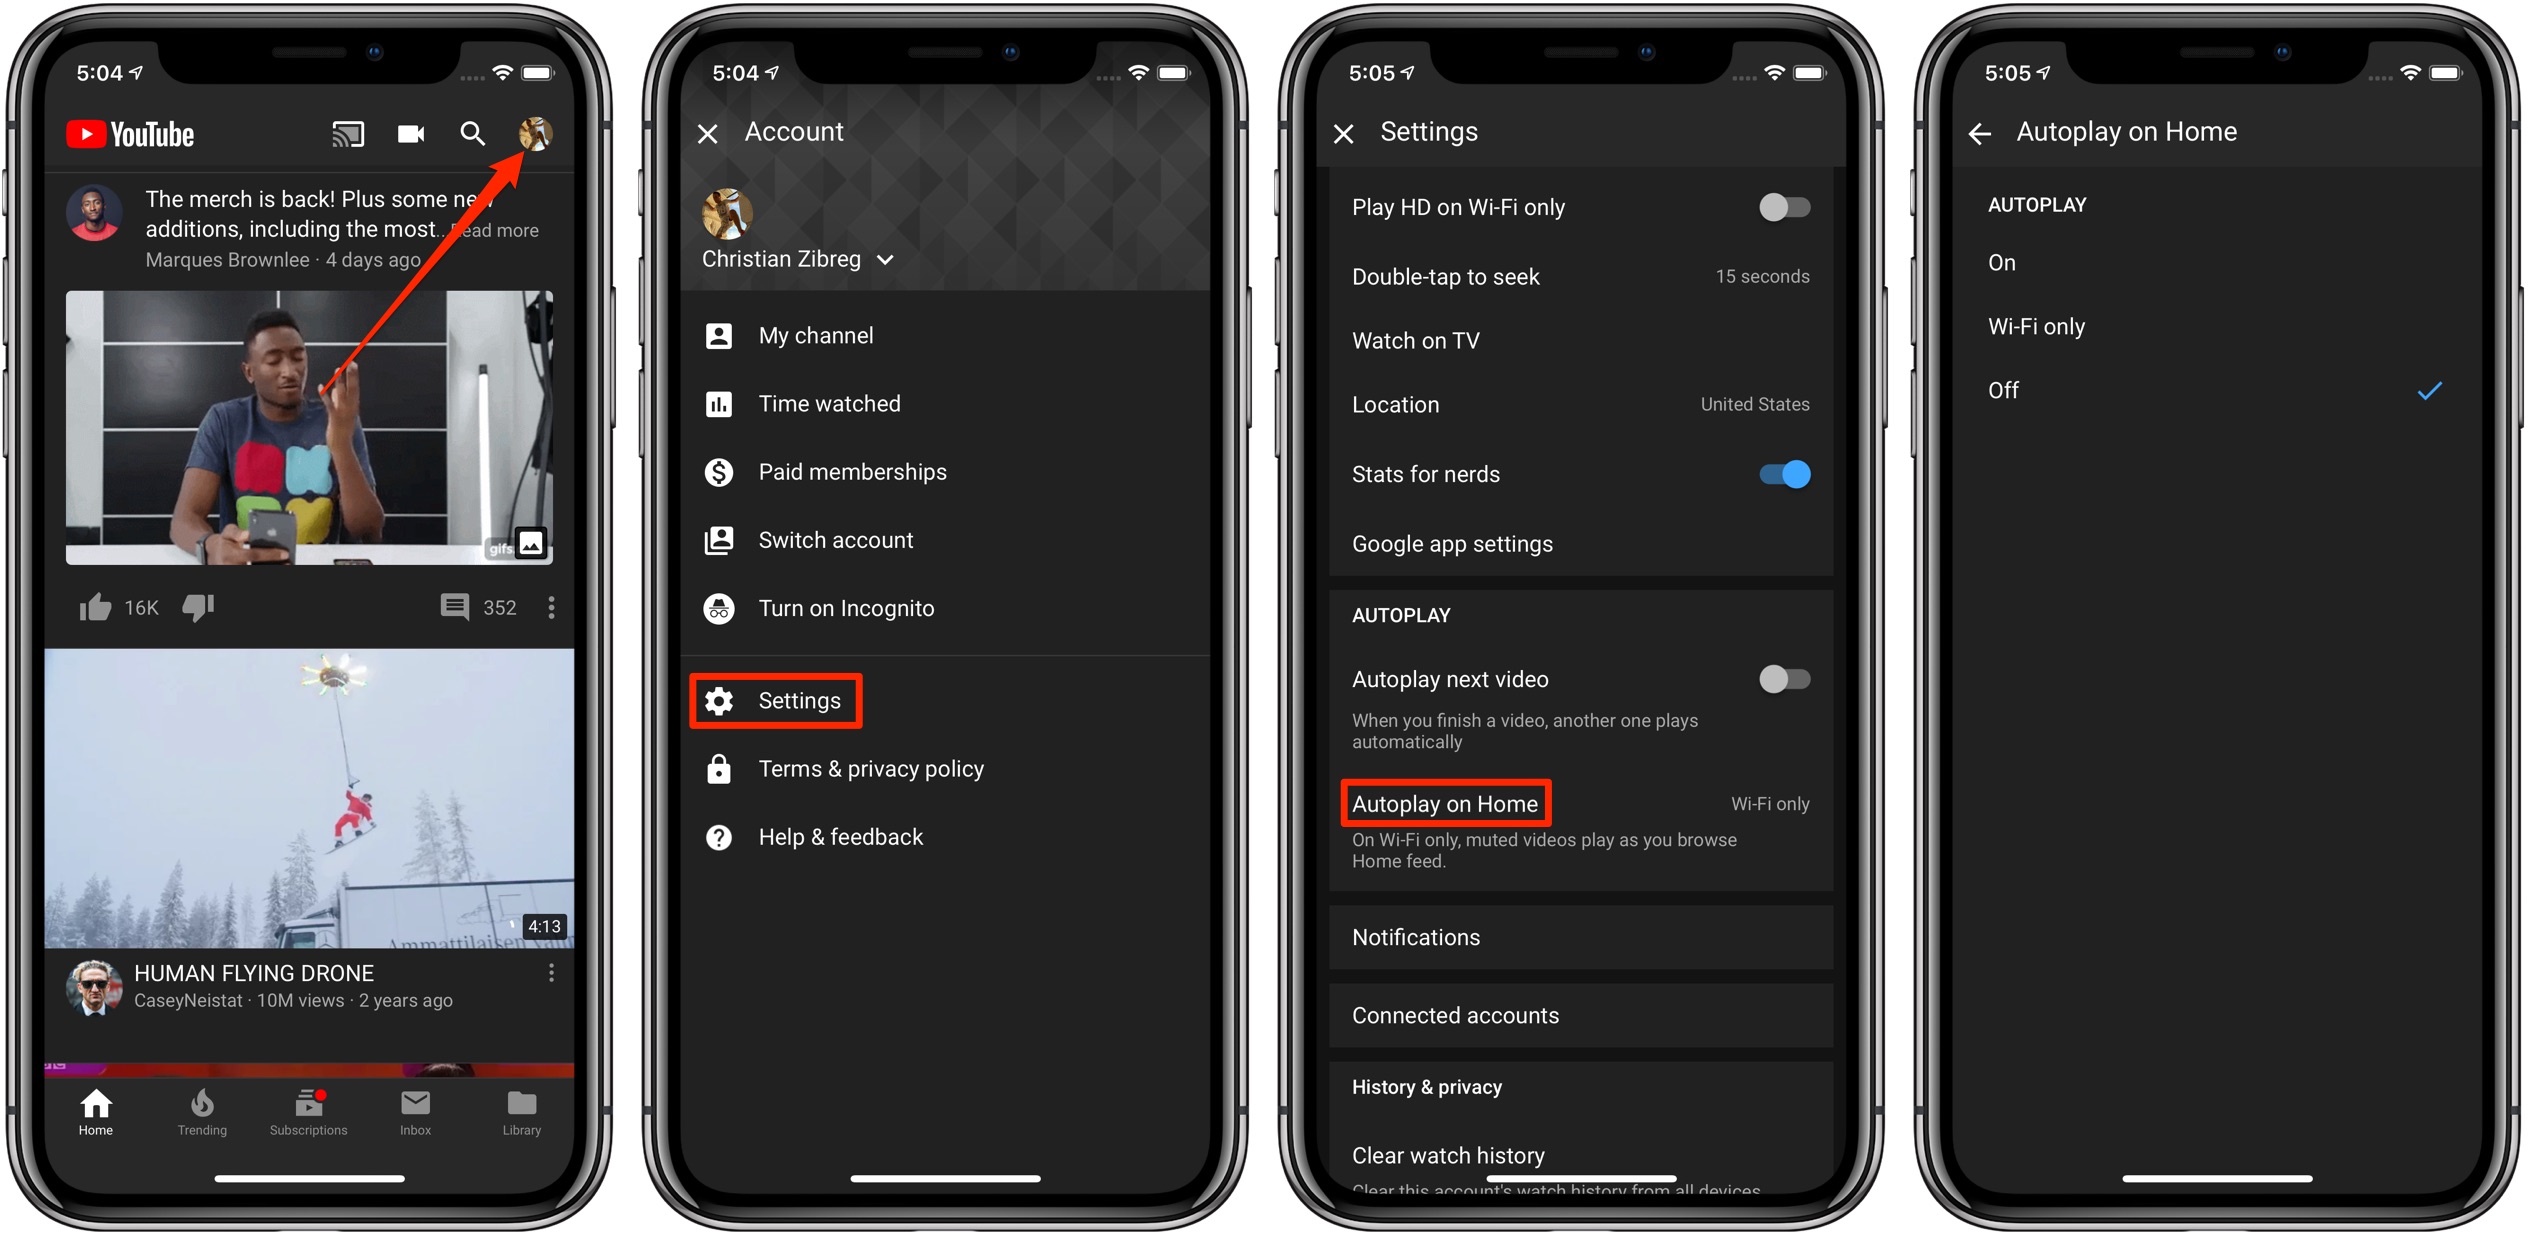 How to disable autoplaying videos in the Home tab of the YouTube app